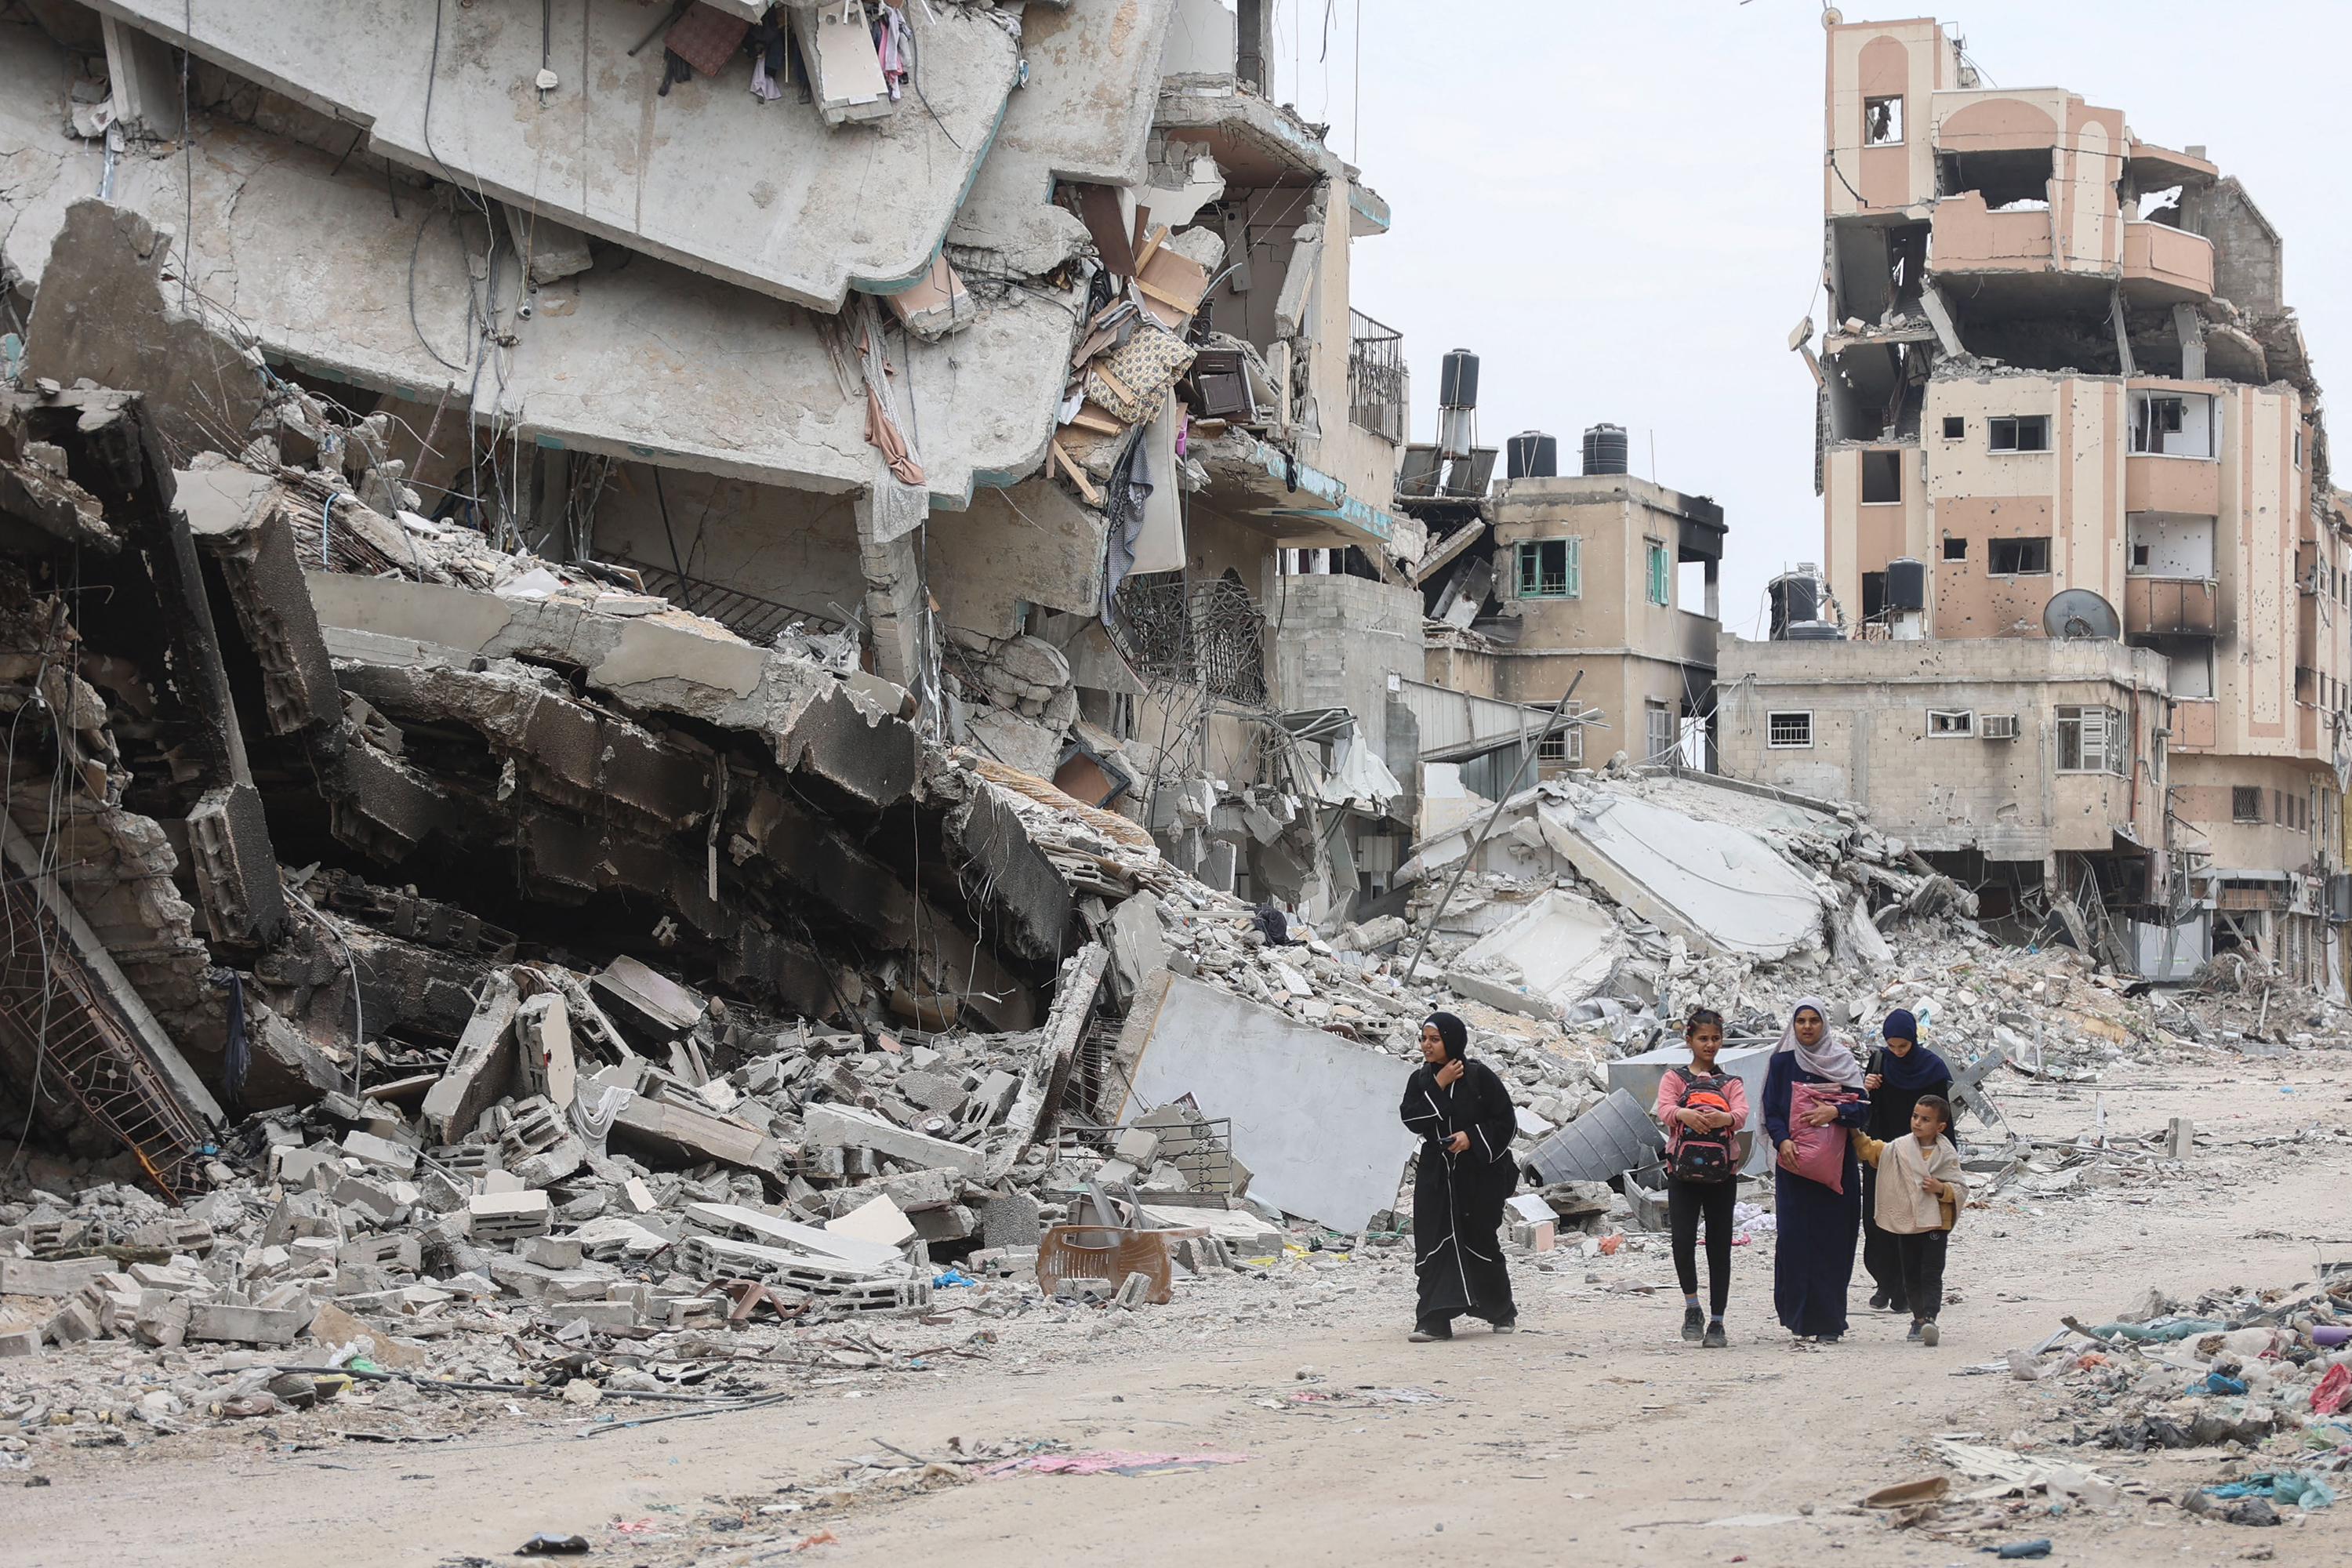 Palestinian women and children walk past the ruins of buildings destroyed by earlier Israeli bombardment in Gaza City on April 8.